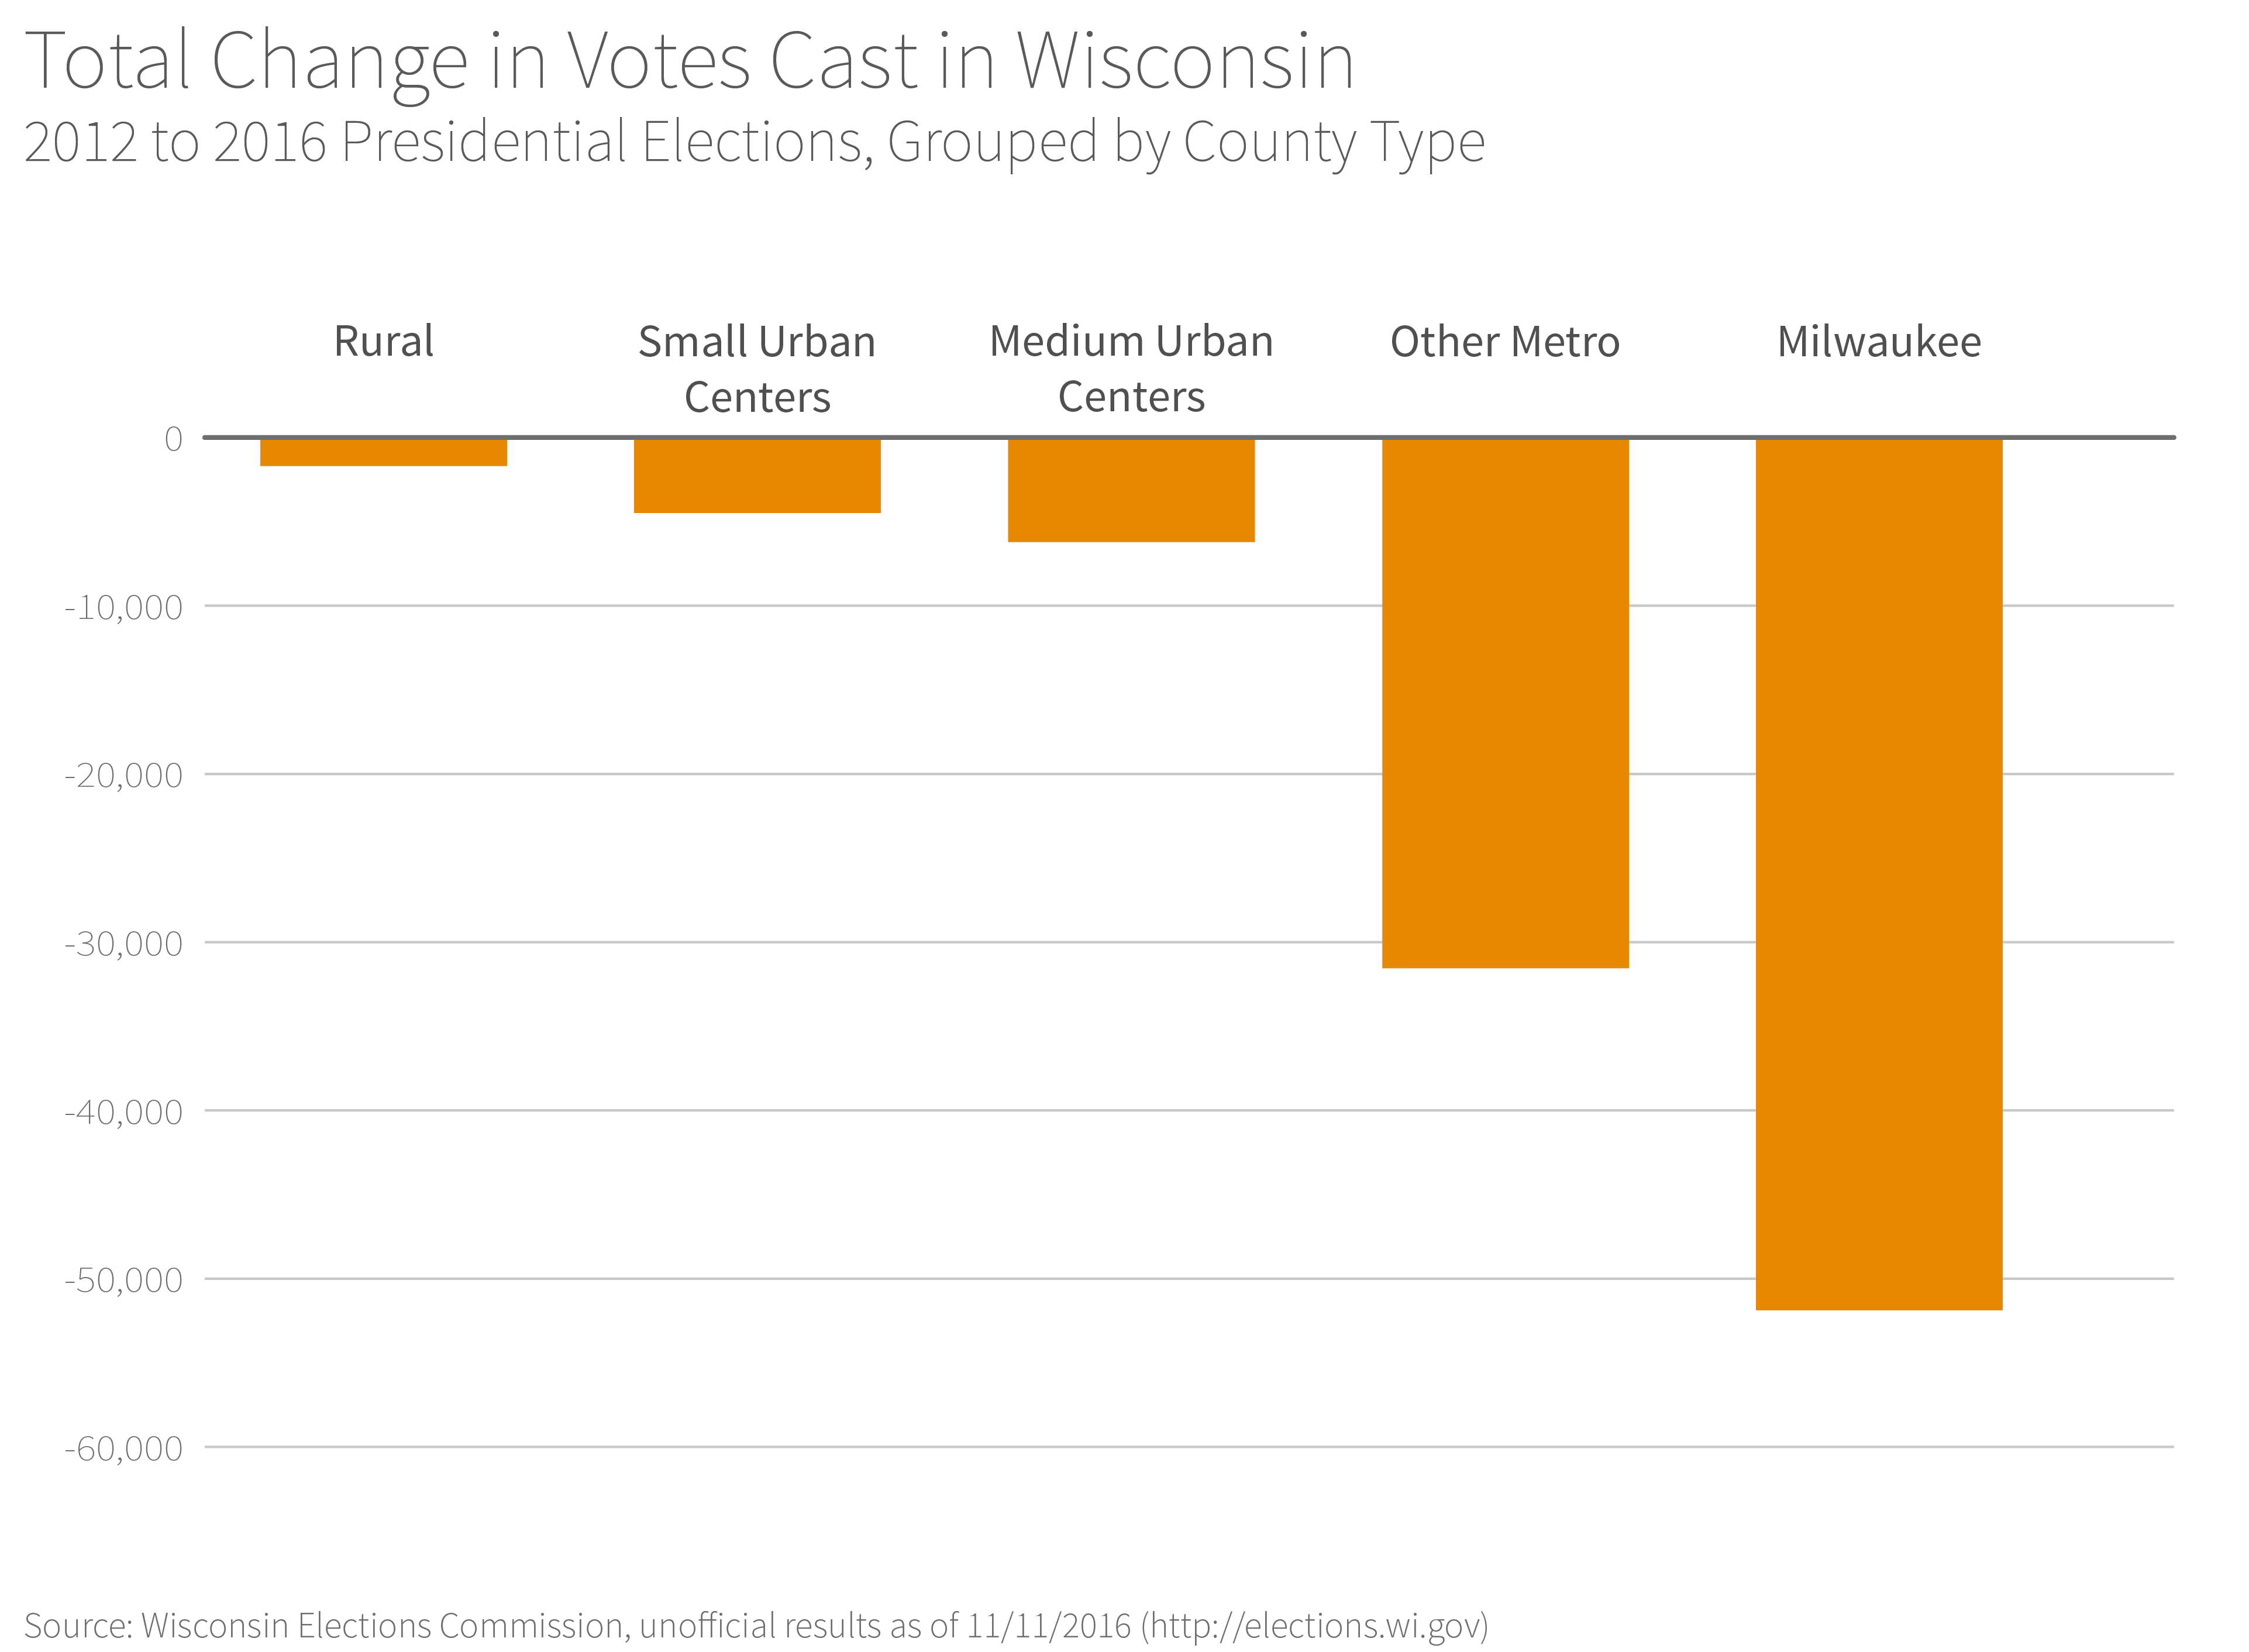 chart showing total change in votes cast by Wisconsin county rurality, 2012 to 2016 presidential elections